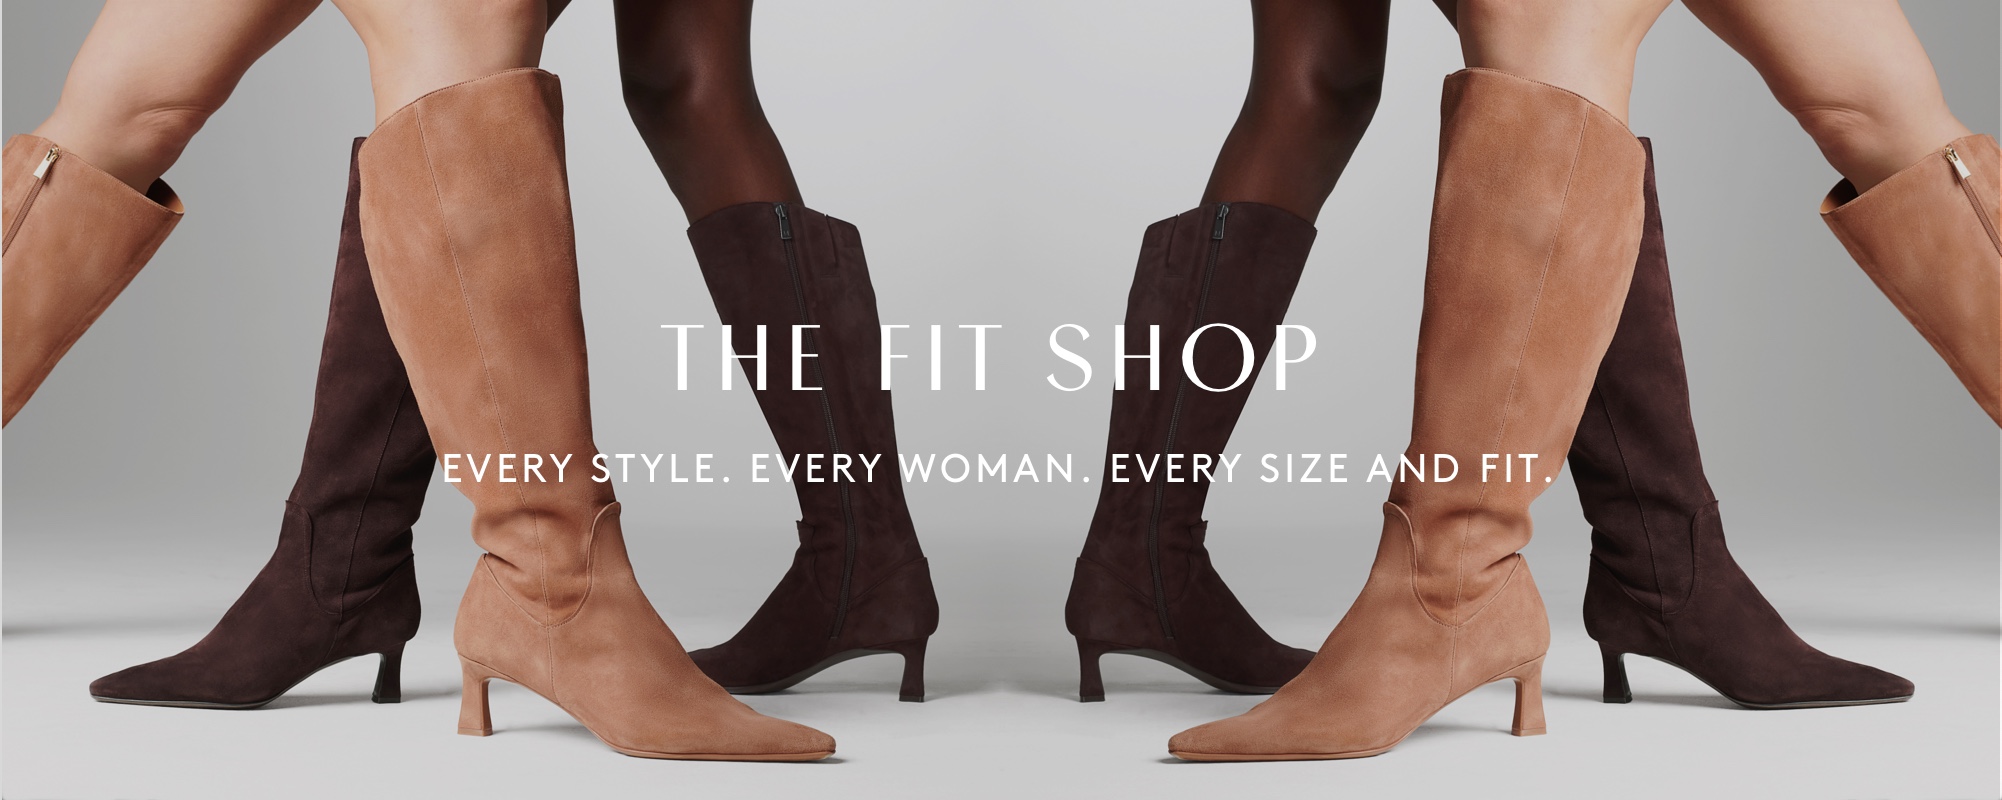 the fit shop. every style. every woman. every size and fit.